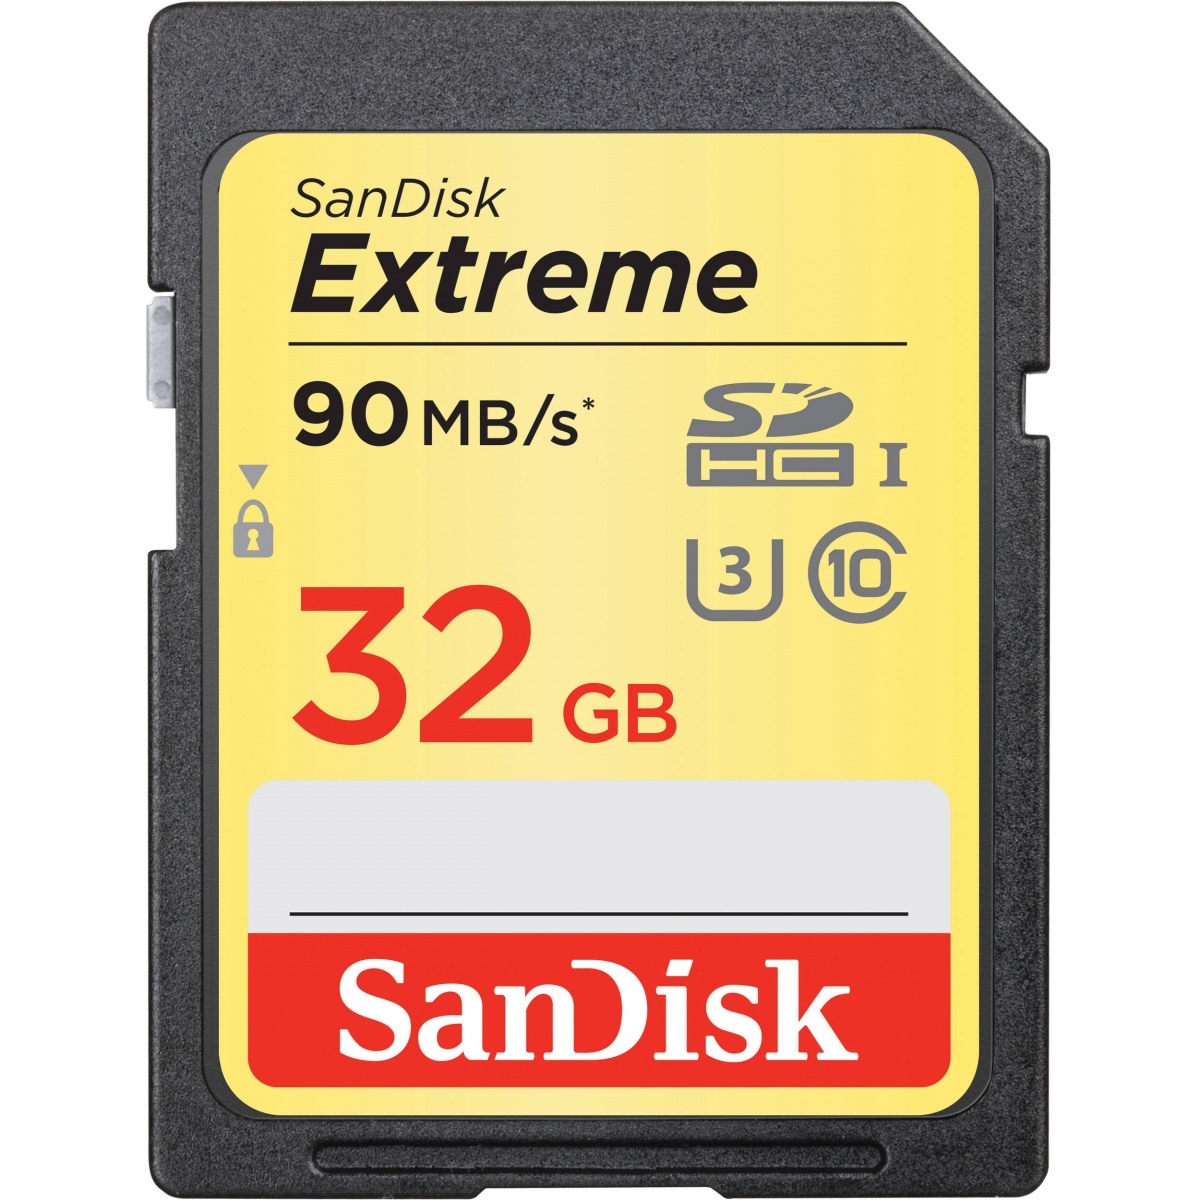 SanDisk Extreme SDHC 32 GB 90MB/s